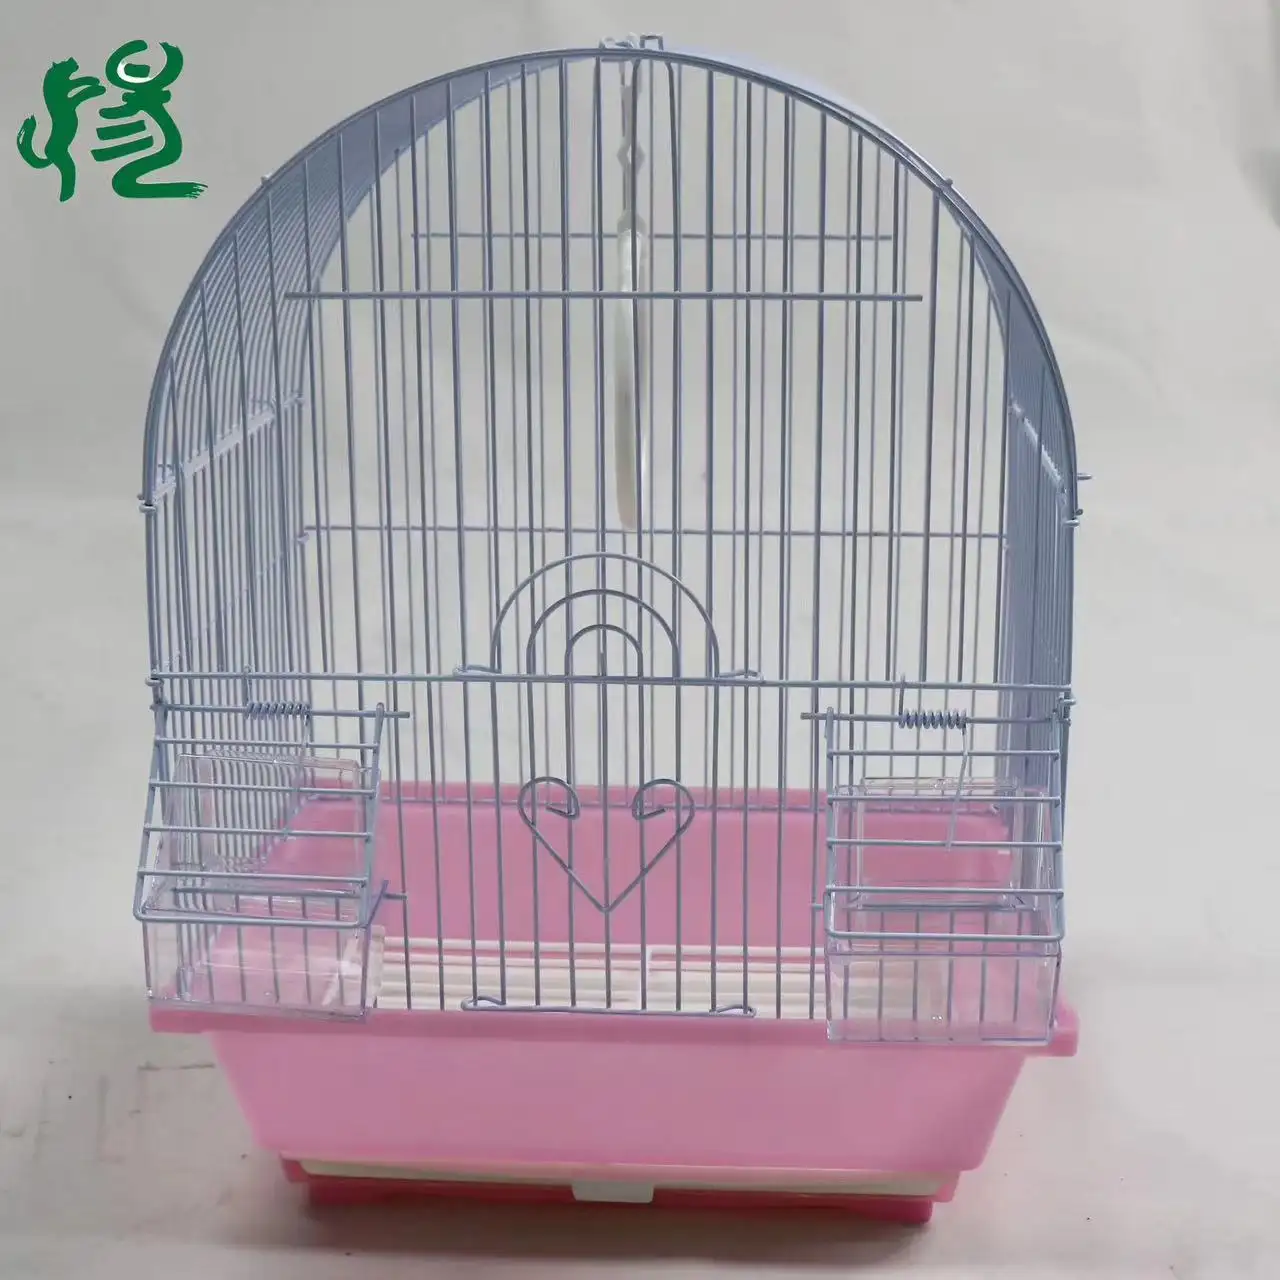 Wholesale metal folding bird cages are fully equipped to carry around pink bird houses with chassis for easy cleaning